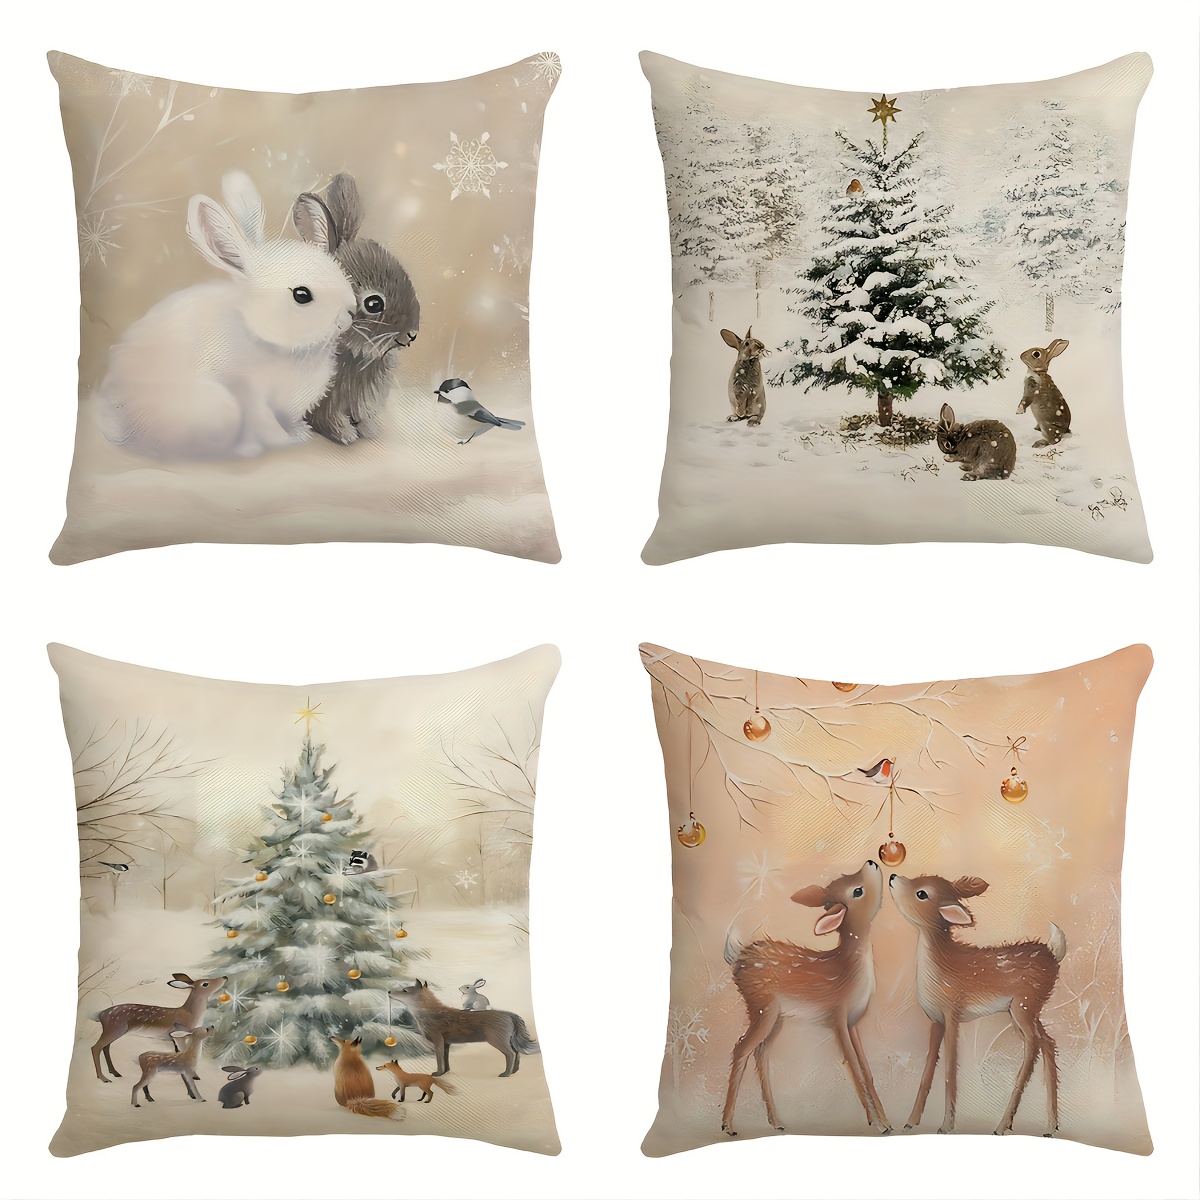 

4-piece Set Festive Christmas Pillow Covers - Elk & Rabbit Design, 18x18 Inch, Polyester, Zip Closure (pillow Insert Not Included), Perfect For Room Decor